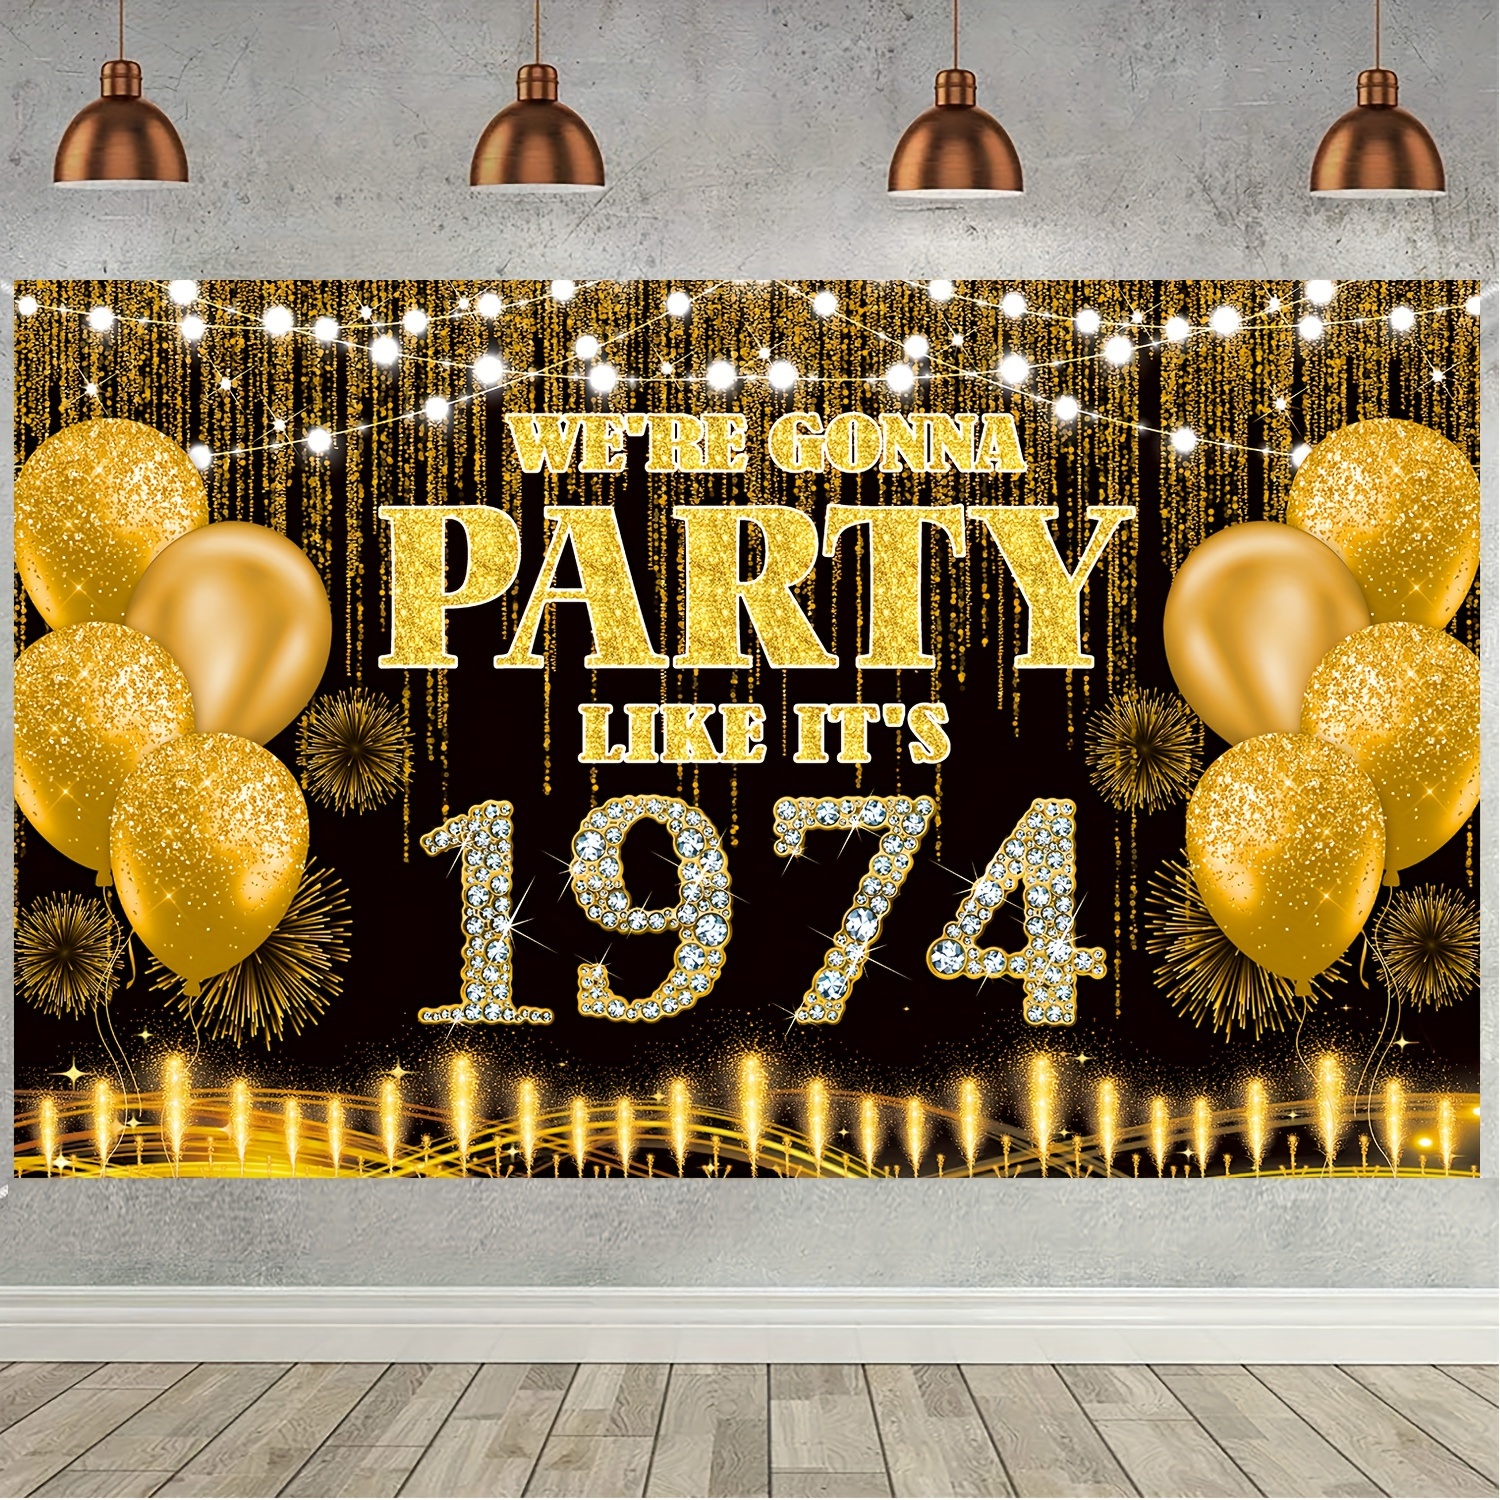 

Vintage 1974 Black And Gold Vinyl Banner - 50th Birthday Party Decorations, Garden Event Backdrop, Classic 1974 Party Supplies, Durable Photography Backdrop For 50th Anniversary Celebration Decor